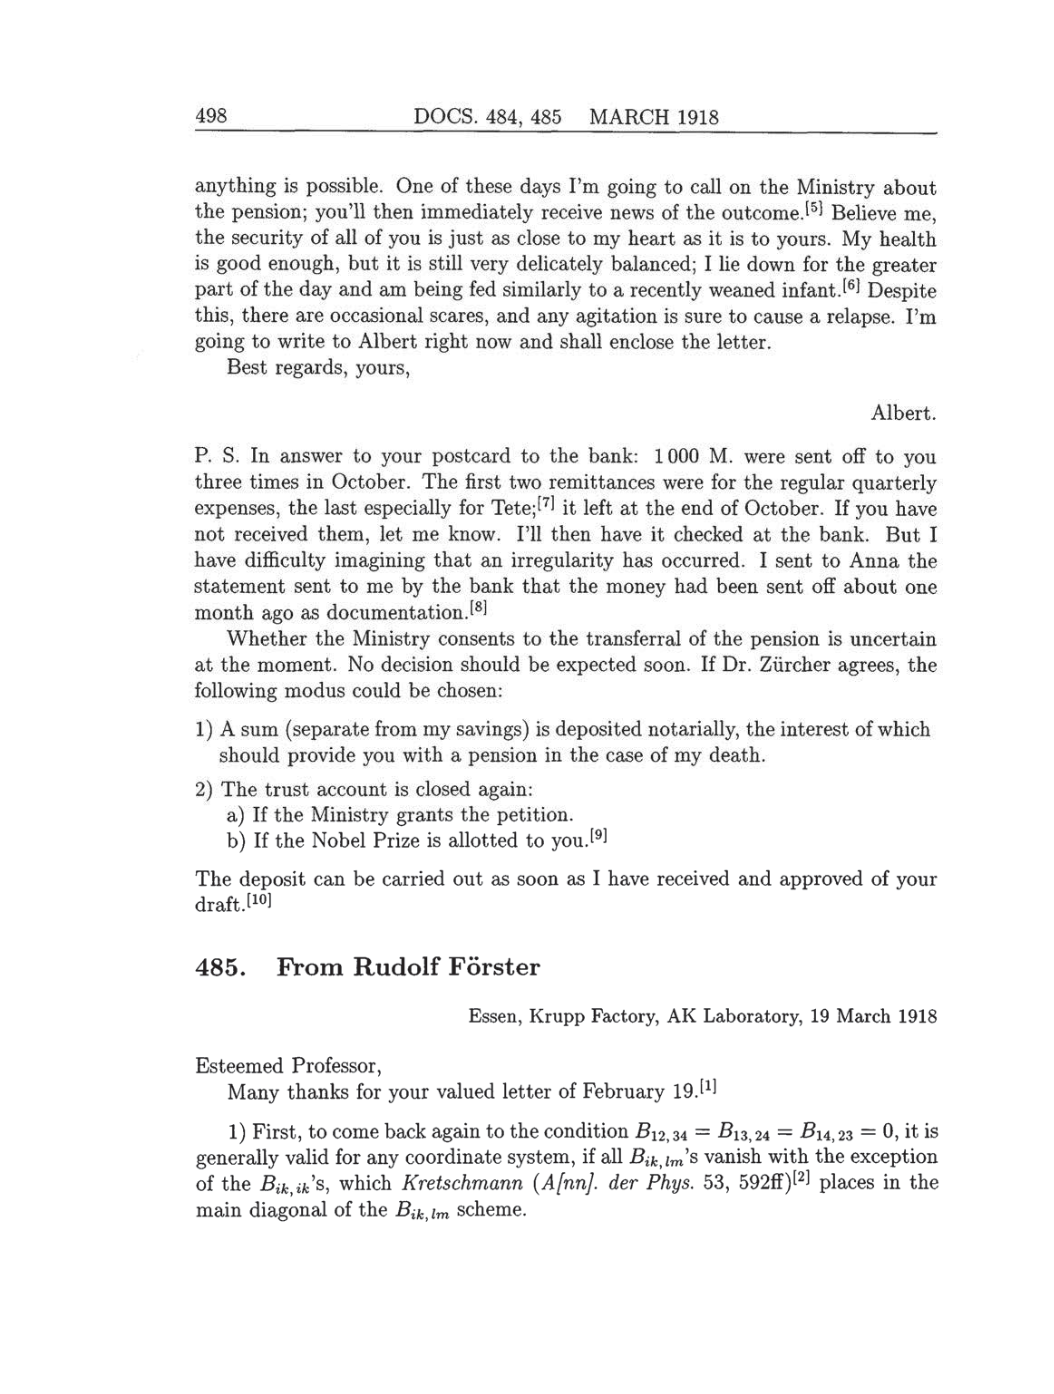 Volume 8: The Berlin Years: Correspondence, 1914-1918 (English translation supplement) page 498